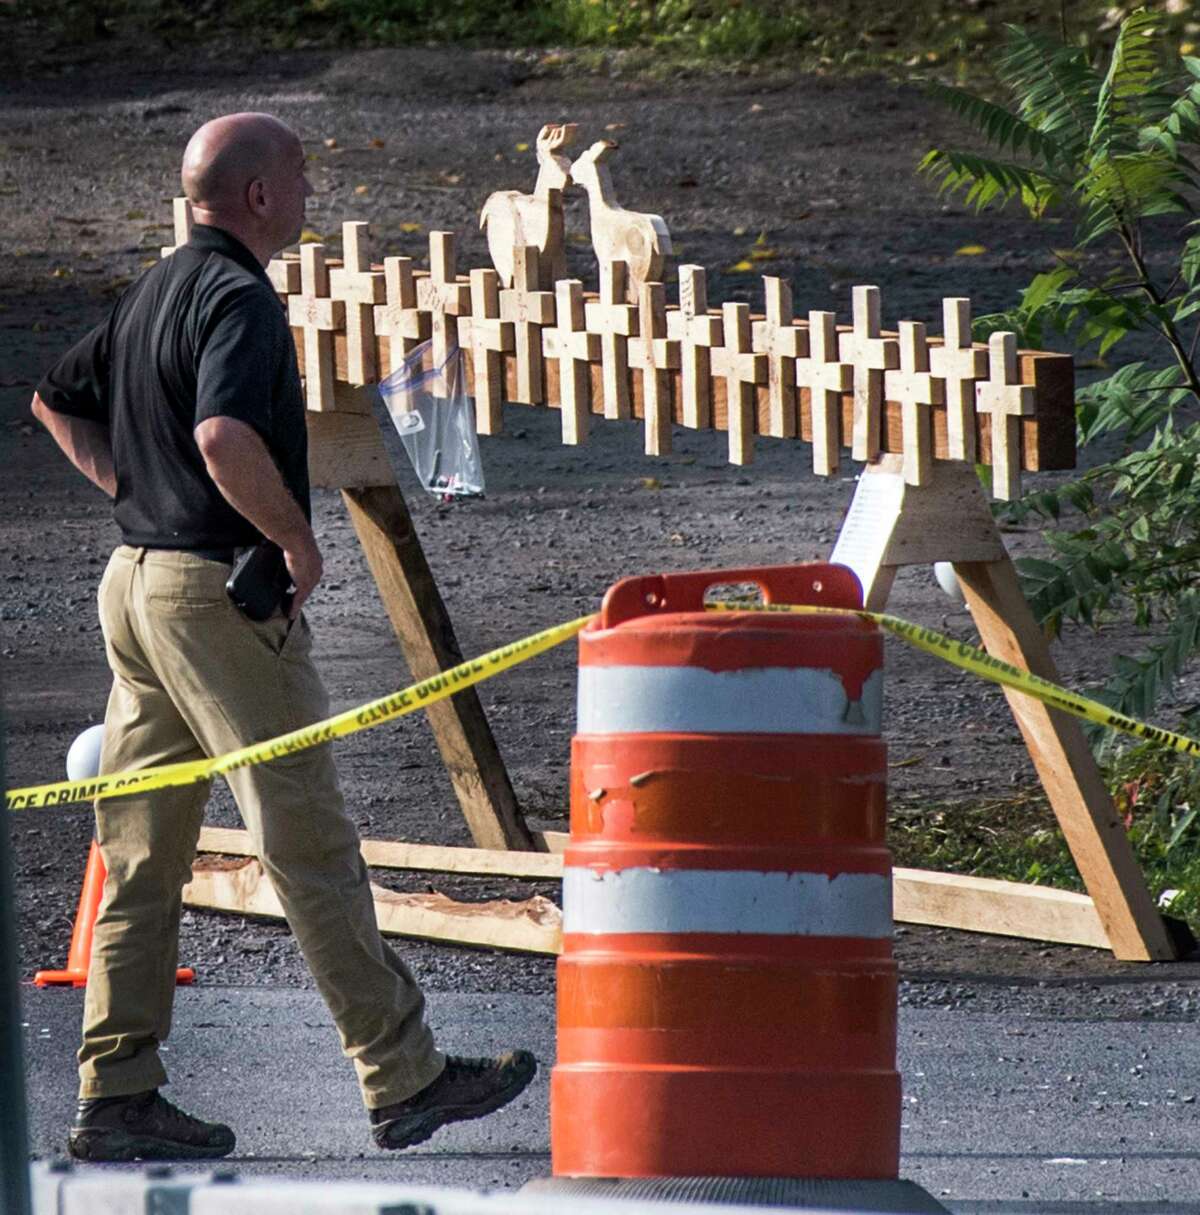 Forensics Investigator from the New York State Police walks past a makeshift memorial at the site of the limousine accident Near the Apple Barrell tourist spot Tuesday Tuesday Oct.8, 2018 in Schoharie, N.Y. that took the lives of twenty people last weekend. (Skip Dickstein/Times Union)